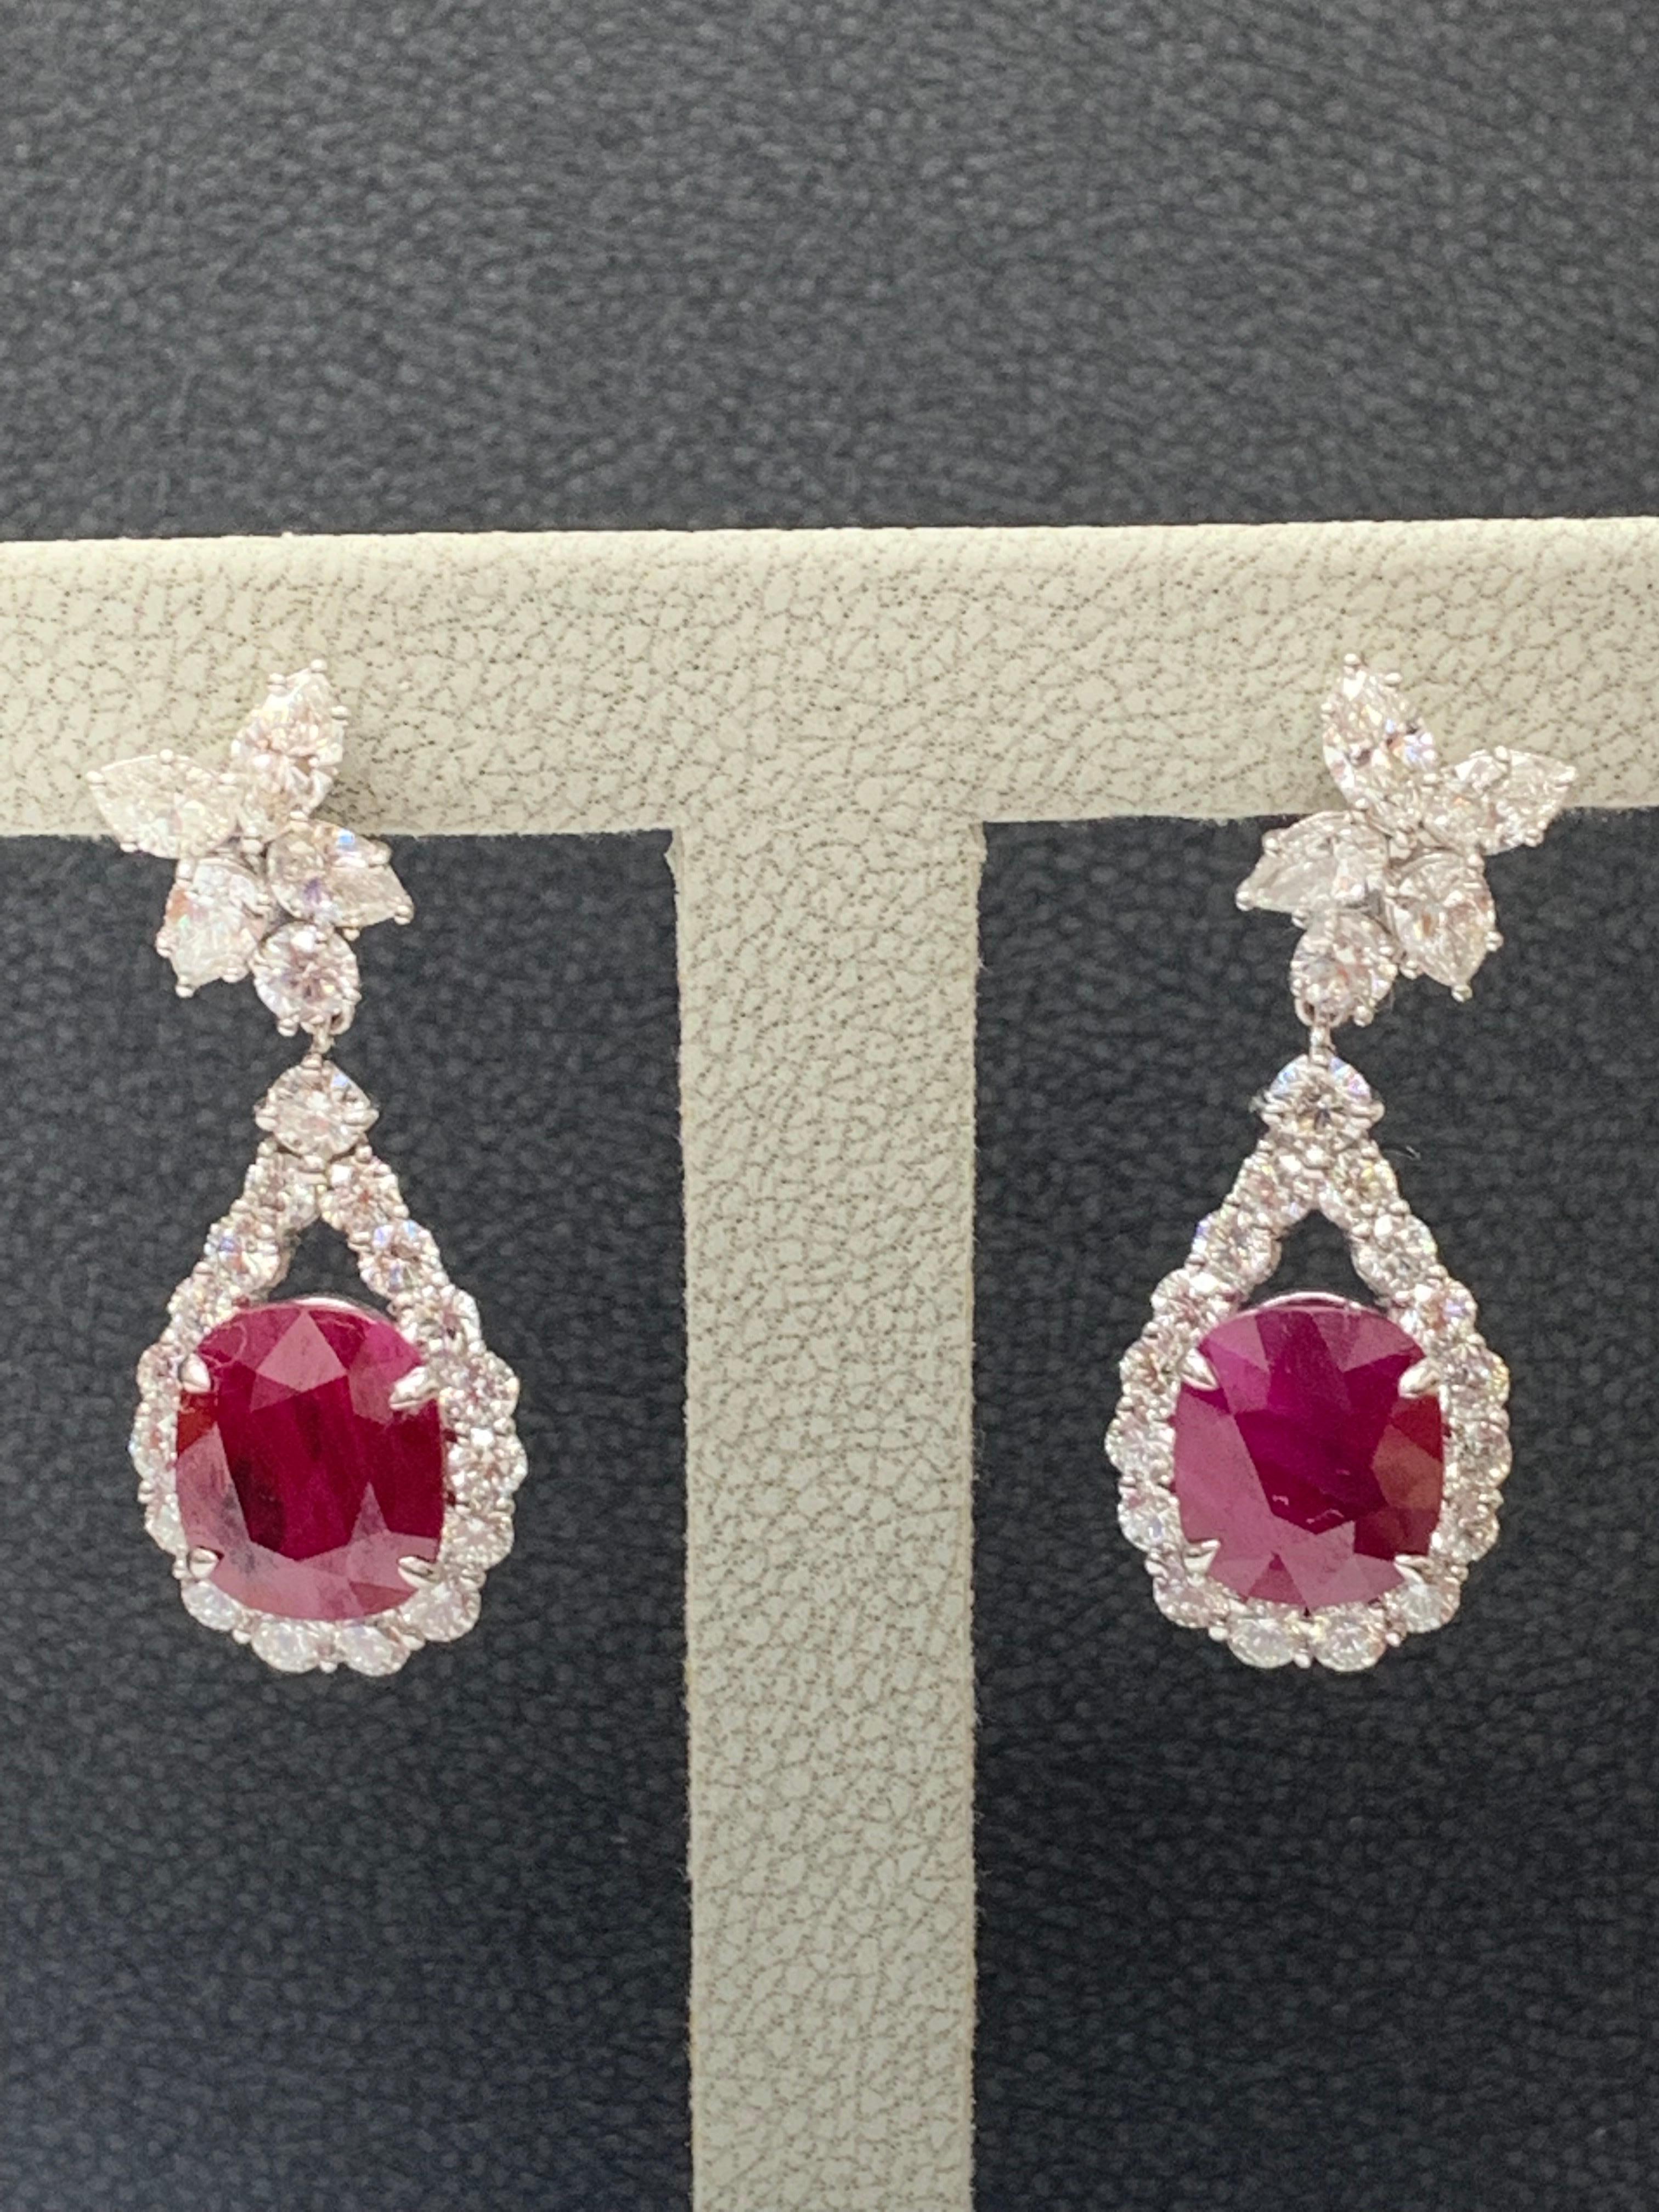 Contemporary Certified 10.18 Carat Burma Ruby and Diamond Drop Earrings in 18K White Gold For Sale